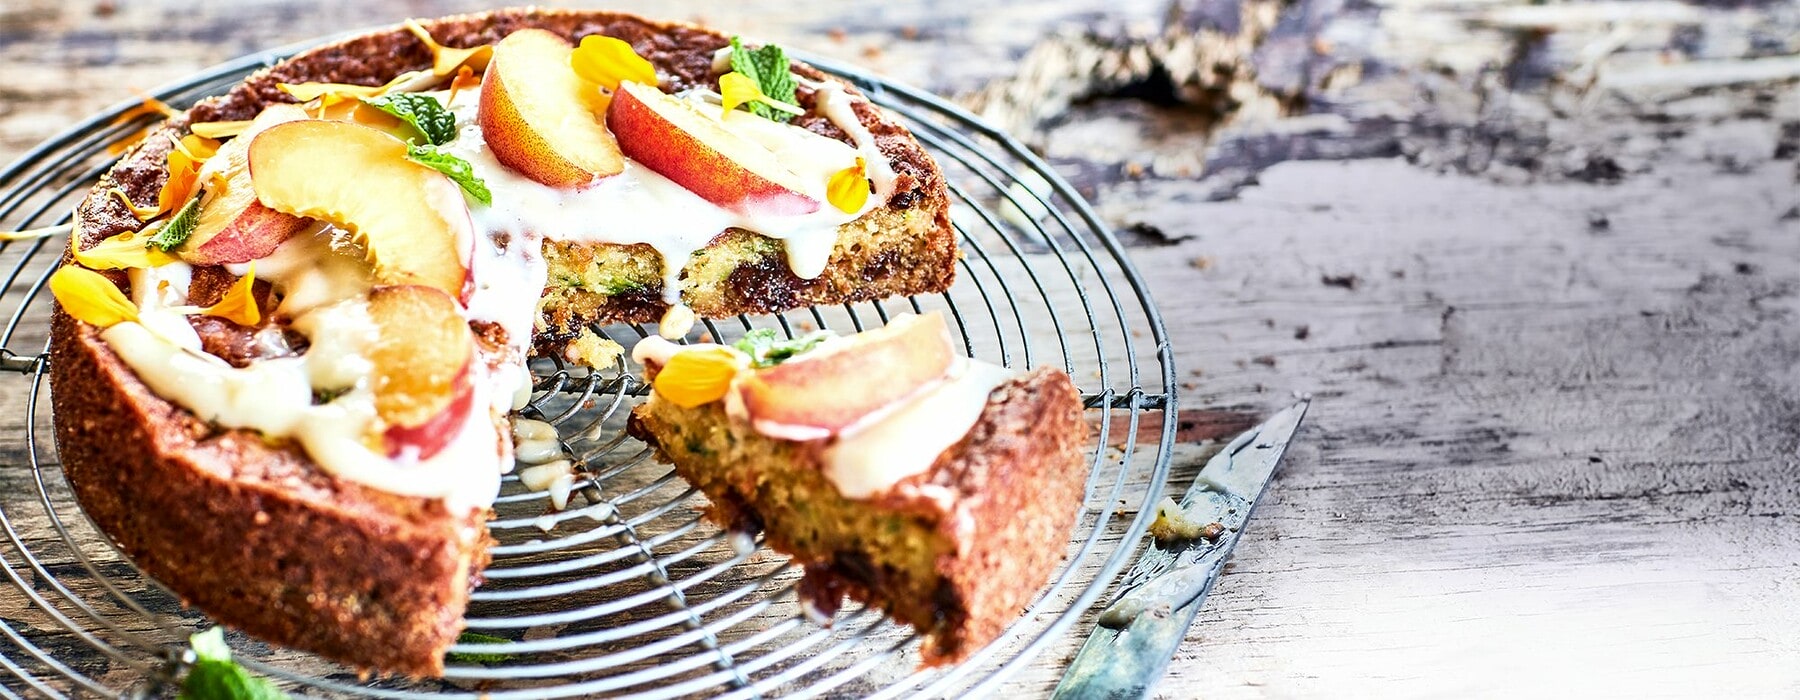 Courgette and raisin cake on a wooden table surrounded by yellow flowers